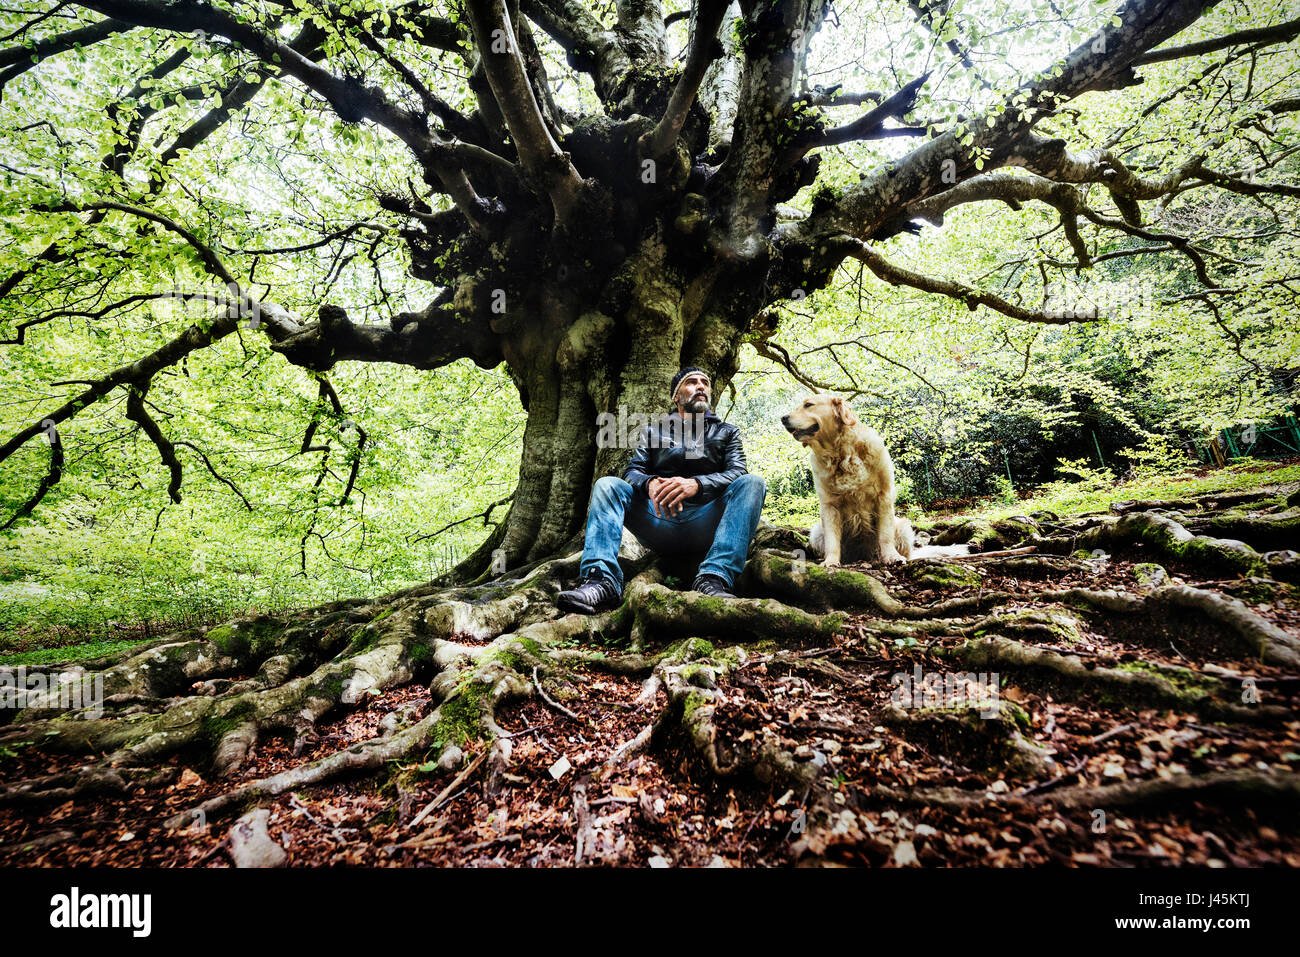 40-45 Years adult man sitting on a root of a beech-tree together with a Golden-Retriever dog in a peaceful landscape. Stock Photo